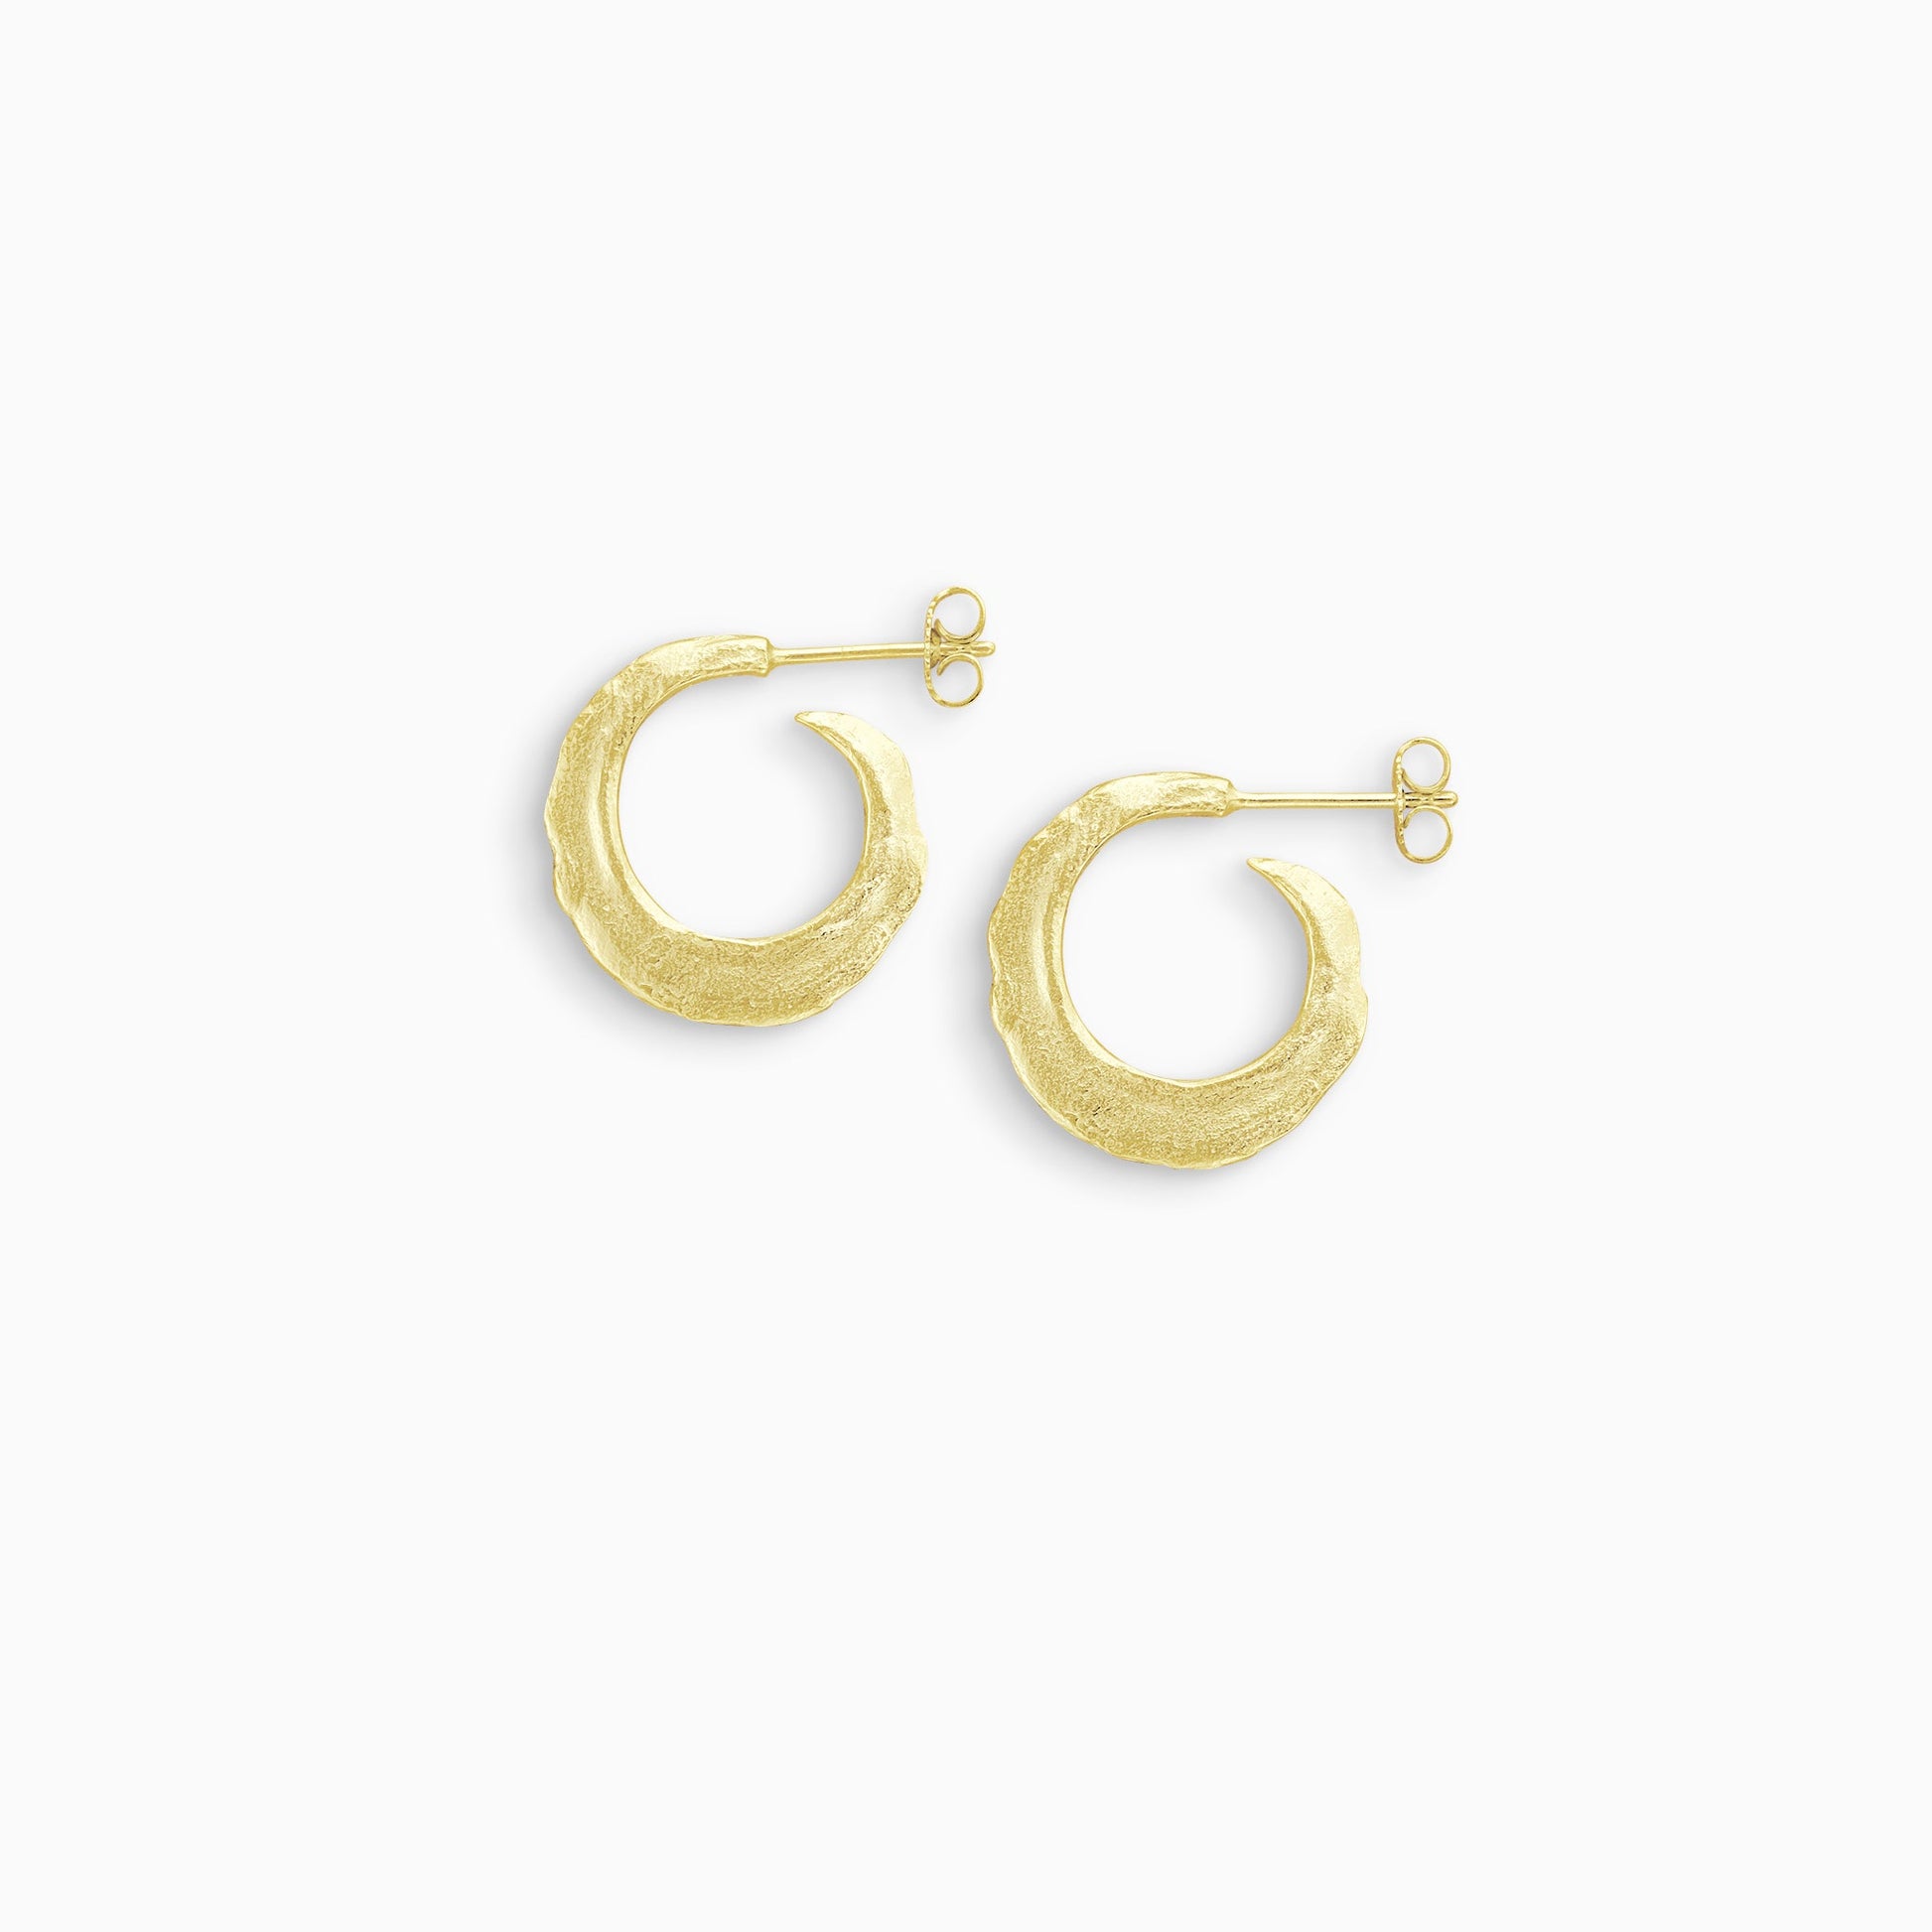 A pair of 18ct Fairtrade yellow gold round hoop earrings with a stud fastening. Organic texture and and tapering from bottom centre to the top. 22mm outside diameter.